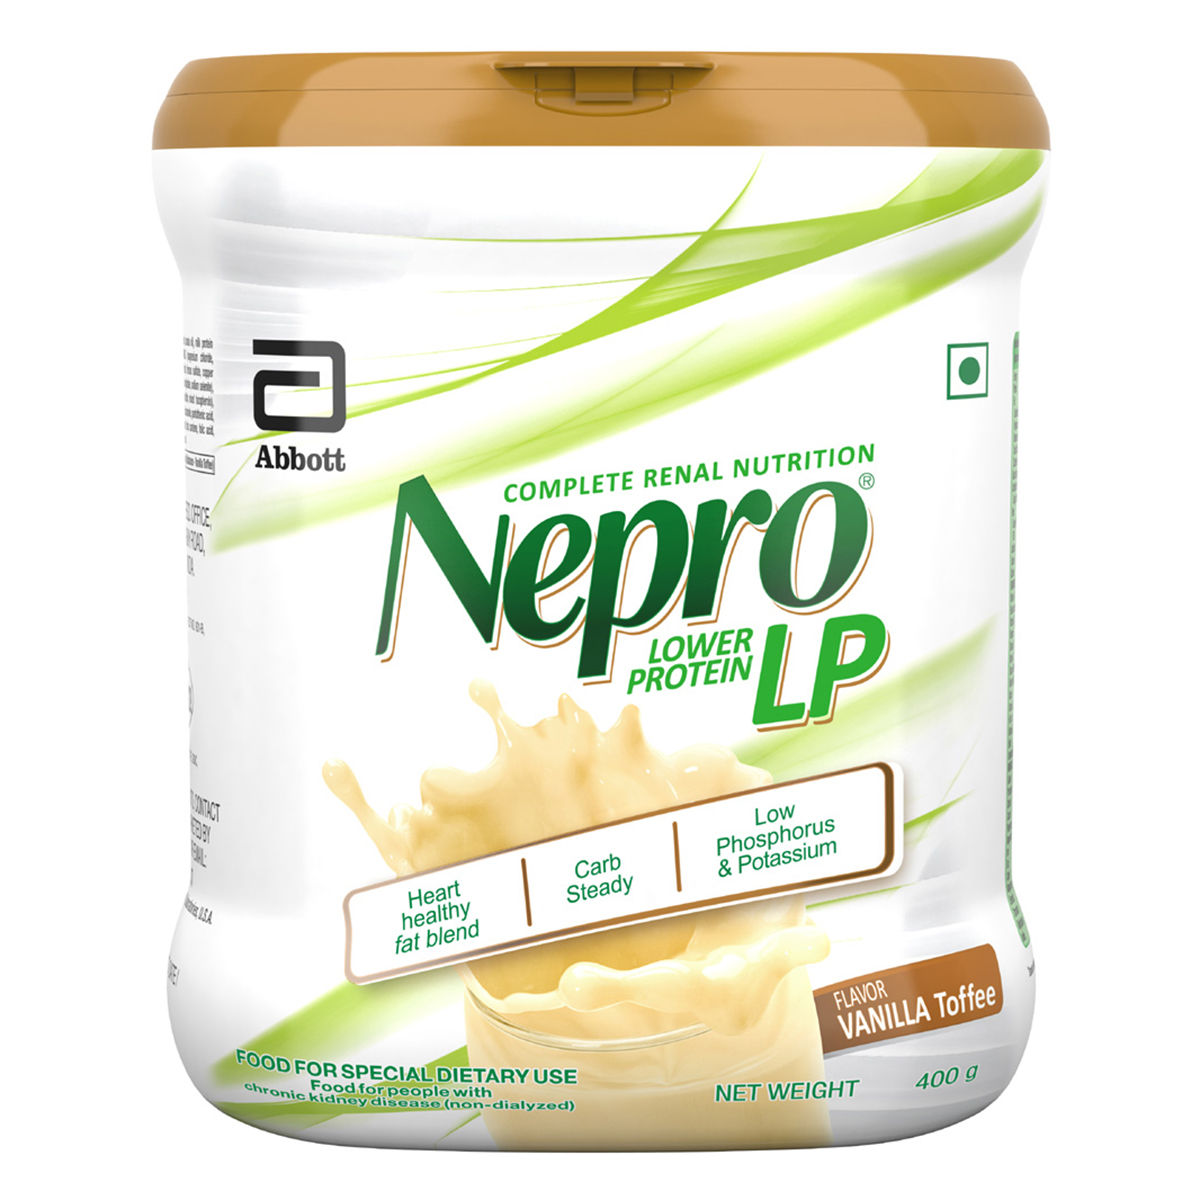 Buy Nepro Complete Renal Nutrition Lower Protein Vanilla Toffee Flavour Powder for Adults, 400 gm  Online